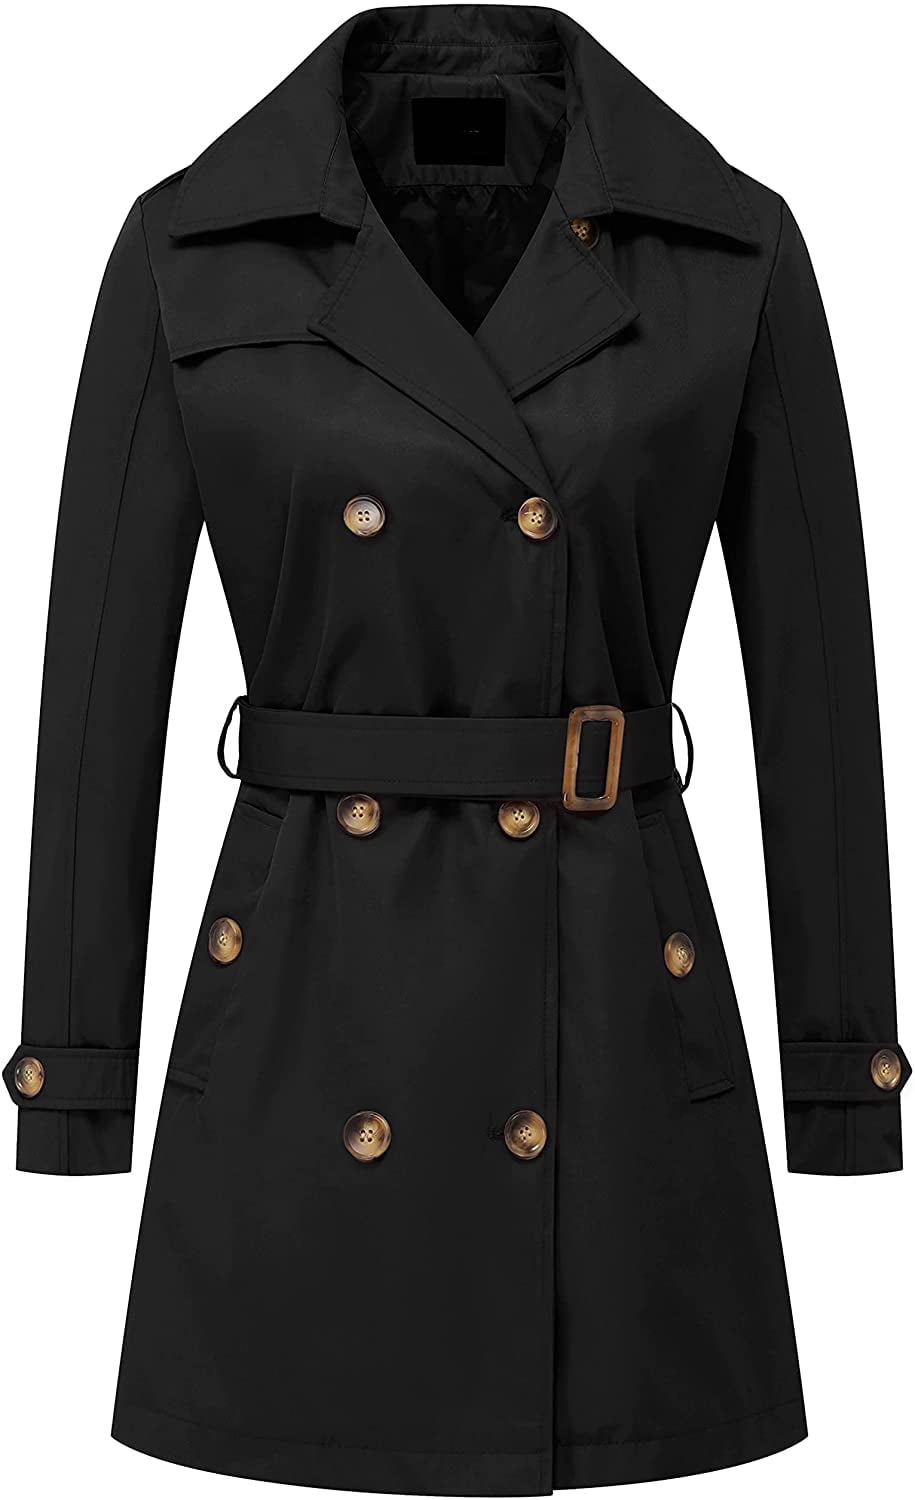 Women's Double Breasted Trench Coats Mid-Length Belted Overcoat Long Dress Jacket with Detachable Hood 